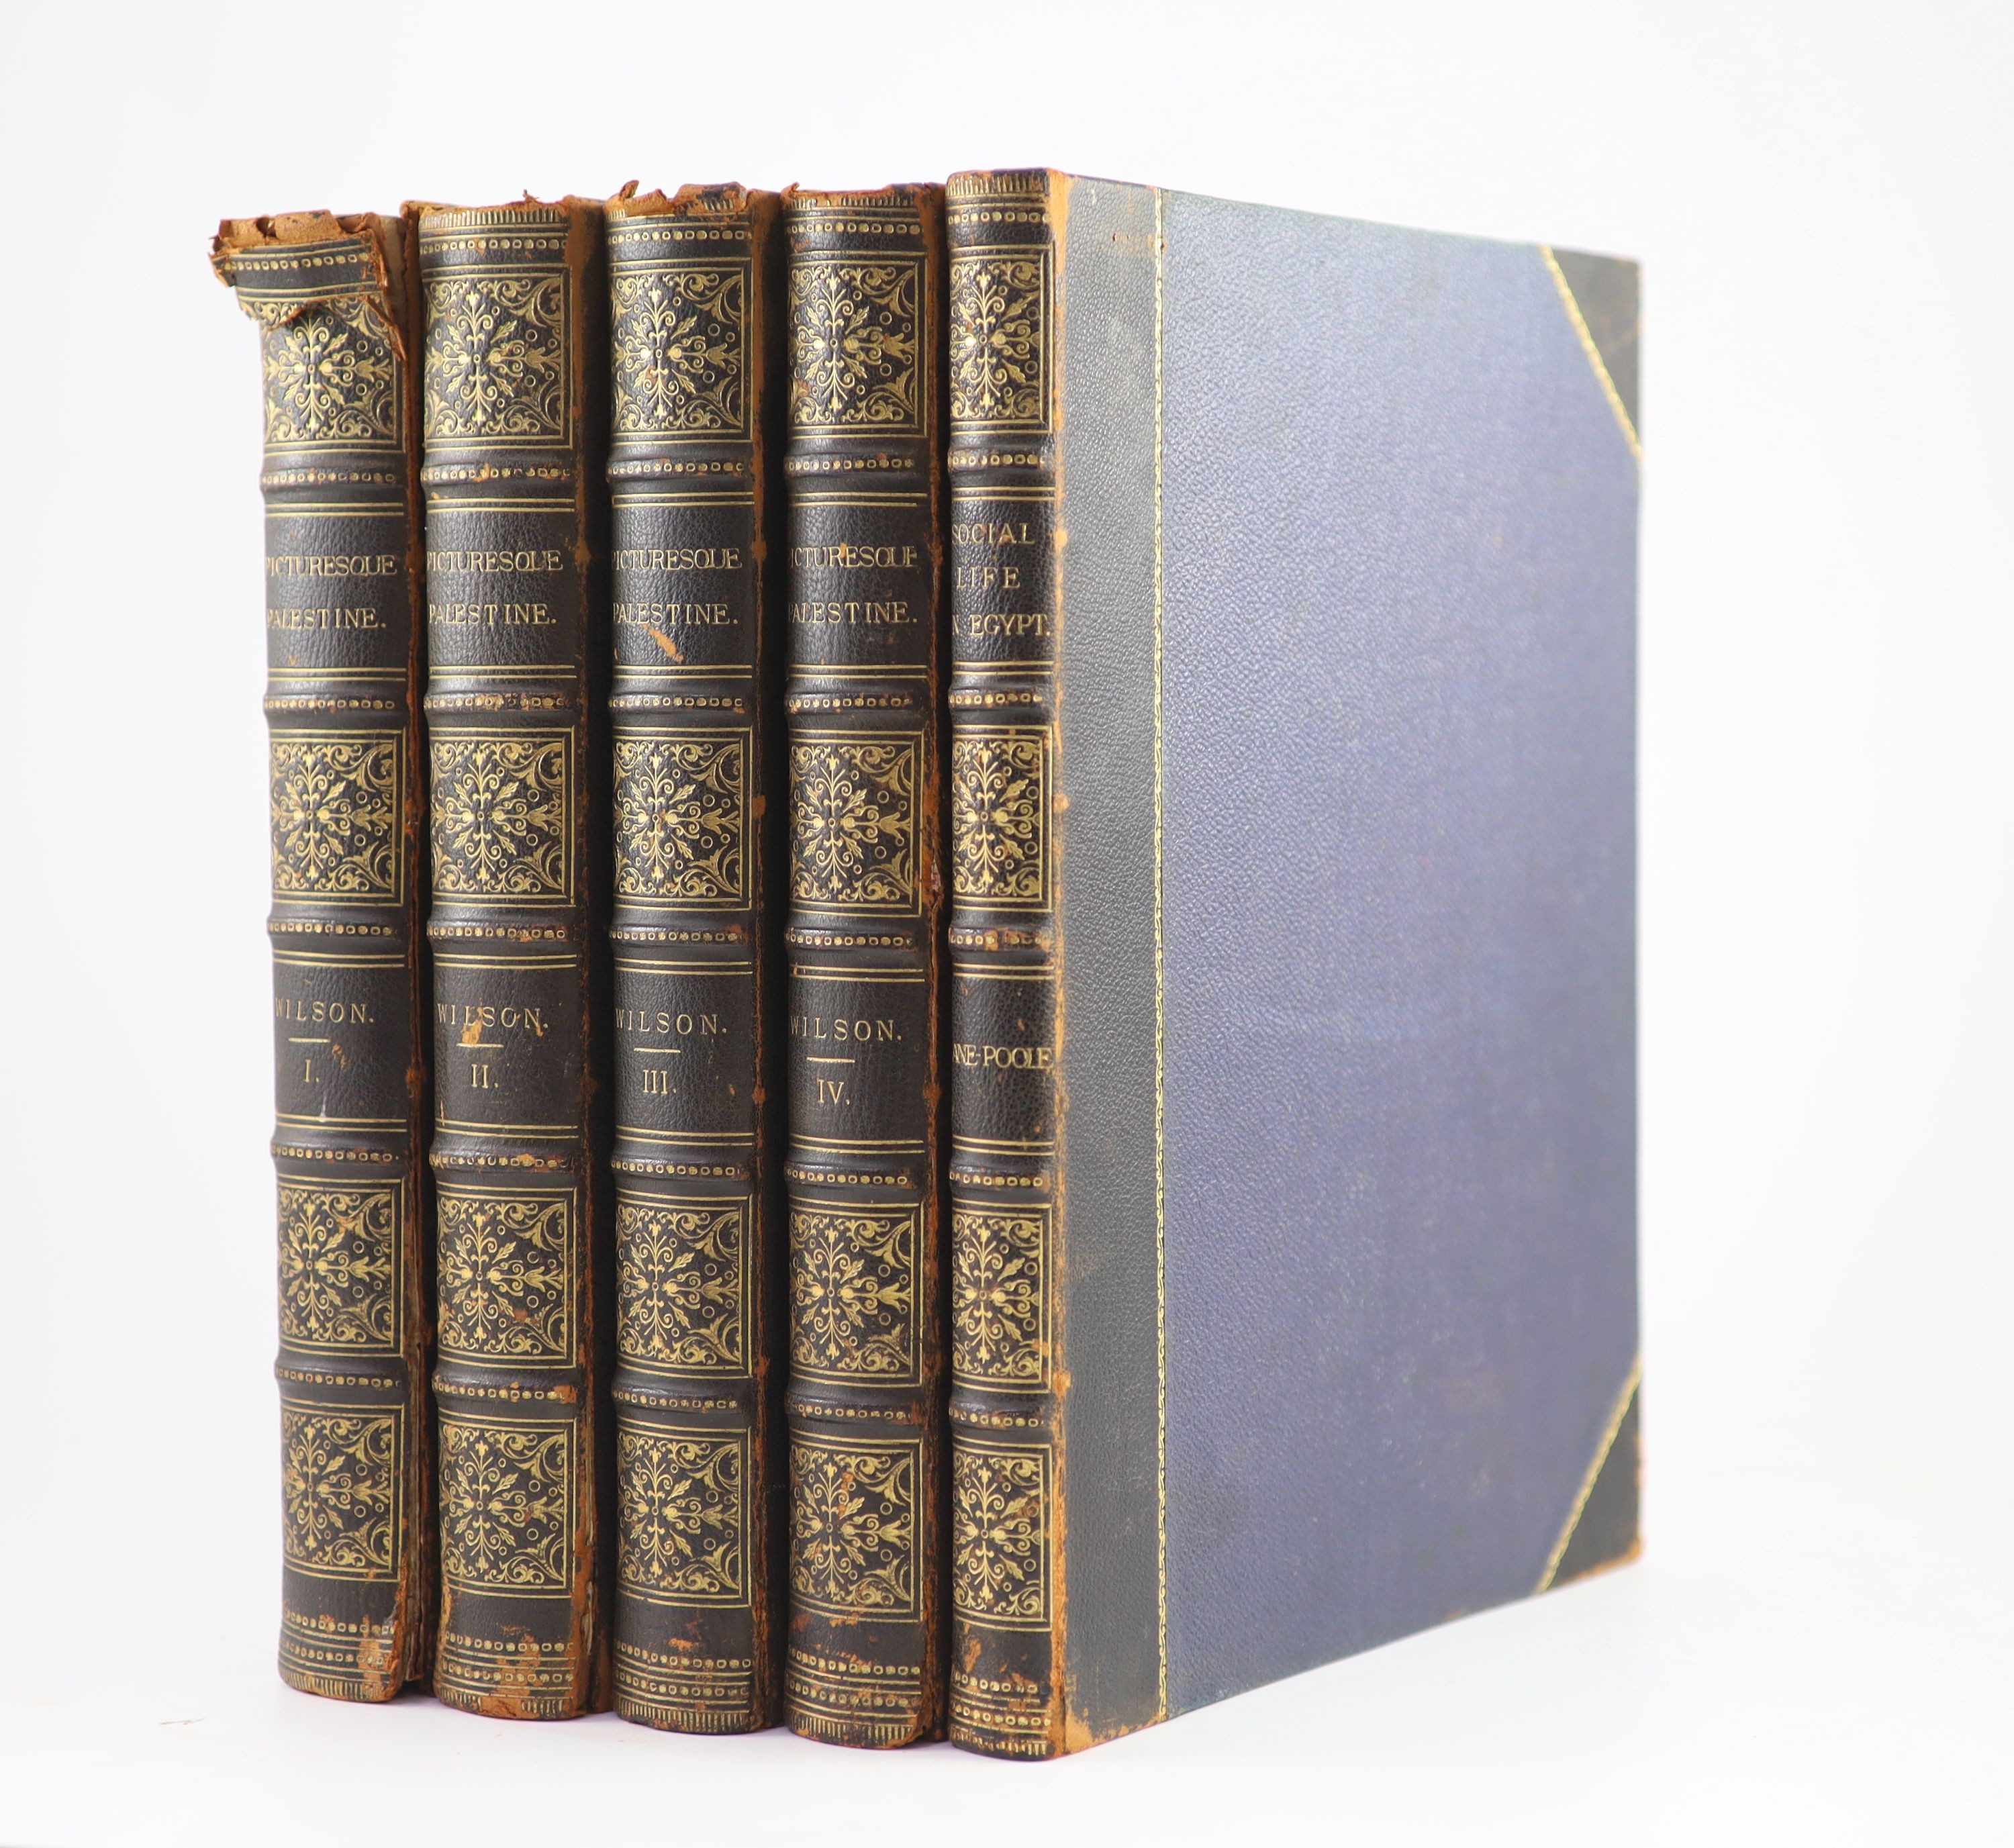 Wilson, Charles William, Sir - Picturesque Palestine, 5 vols, including supplement (Social Life in Egypt by Stanley Lane-Poole) qto, half blue morocco, J.S. Virtue & Co., London, [1880-84]